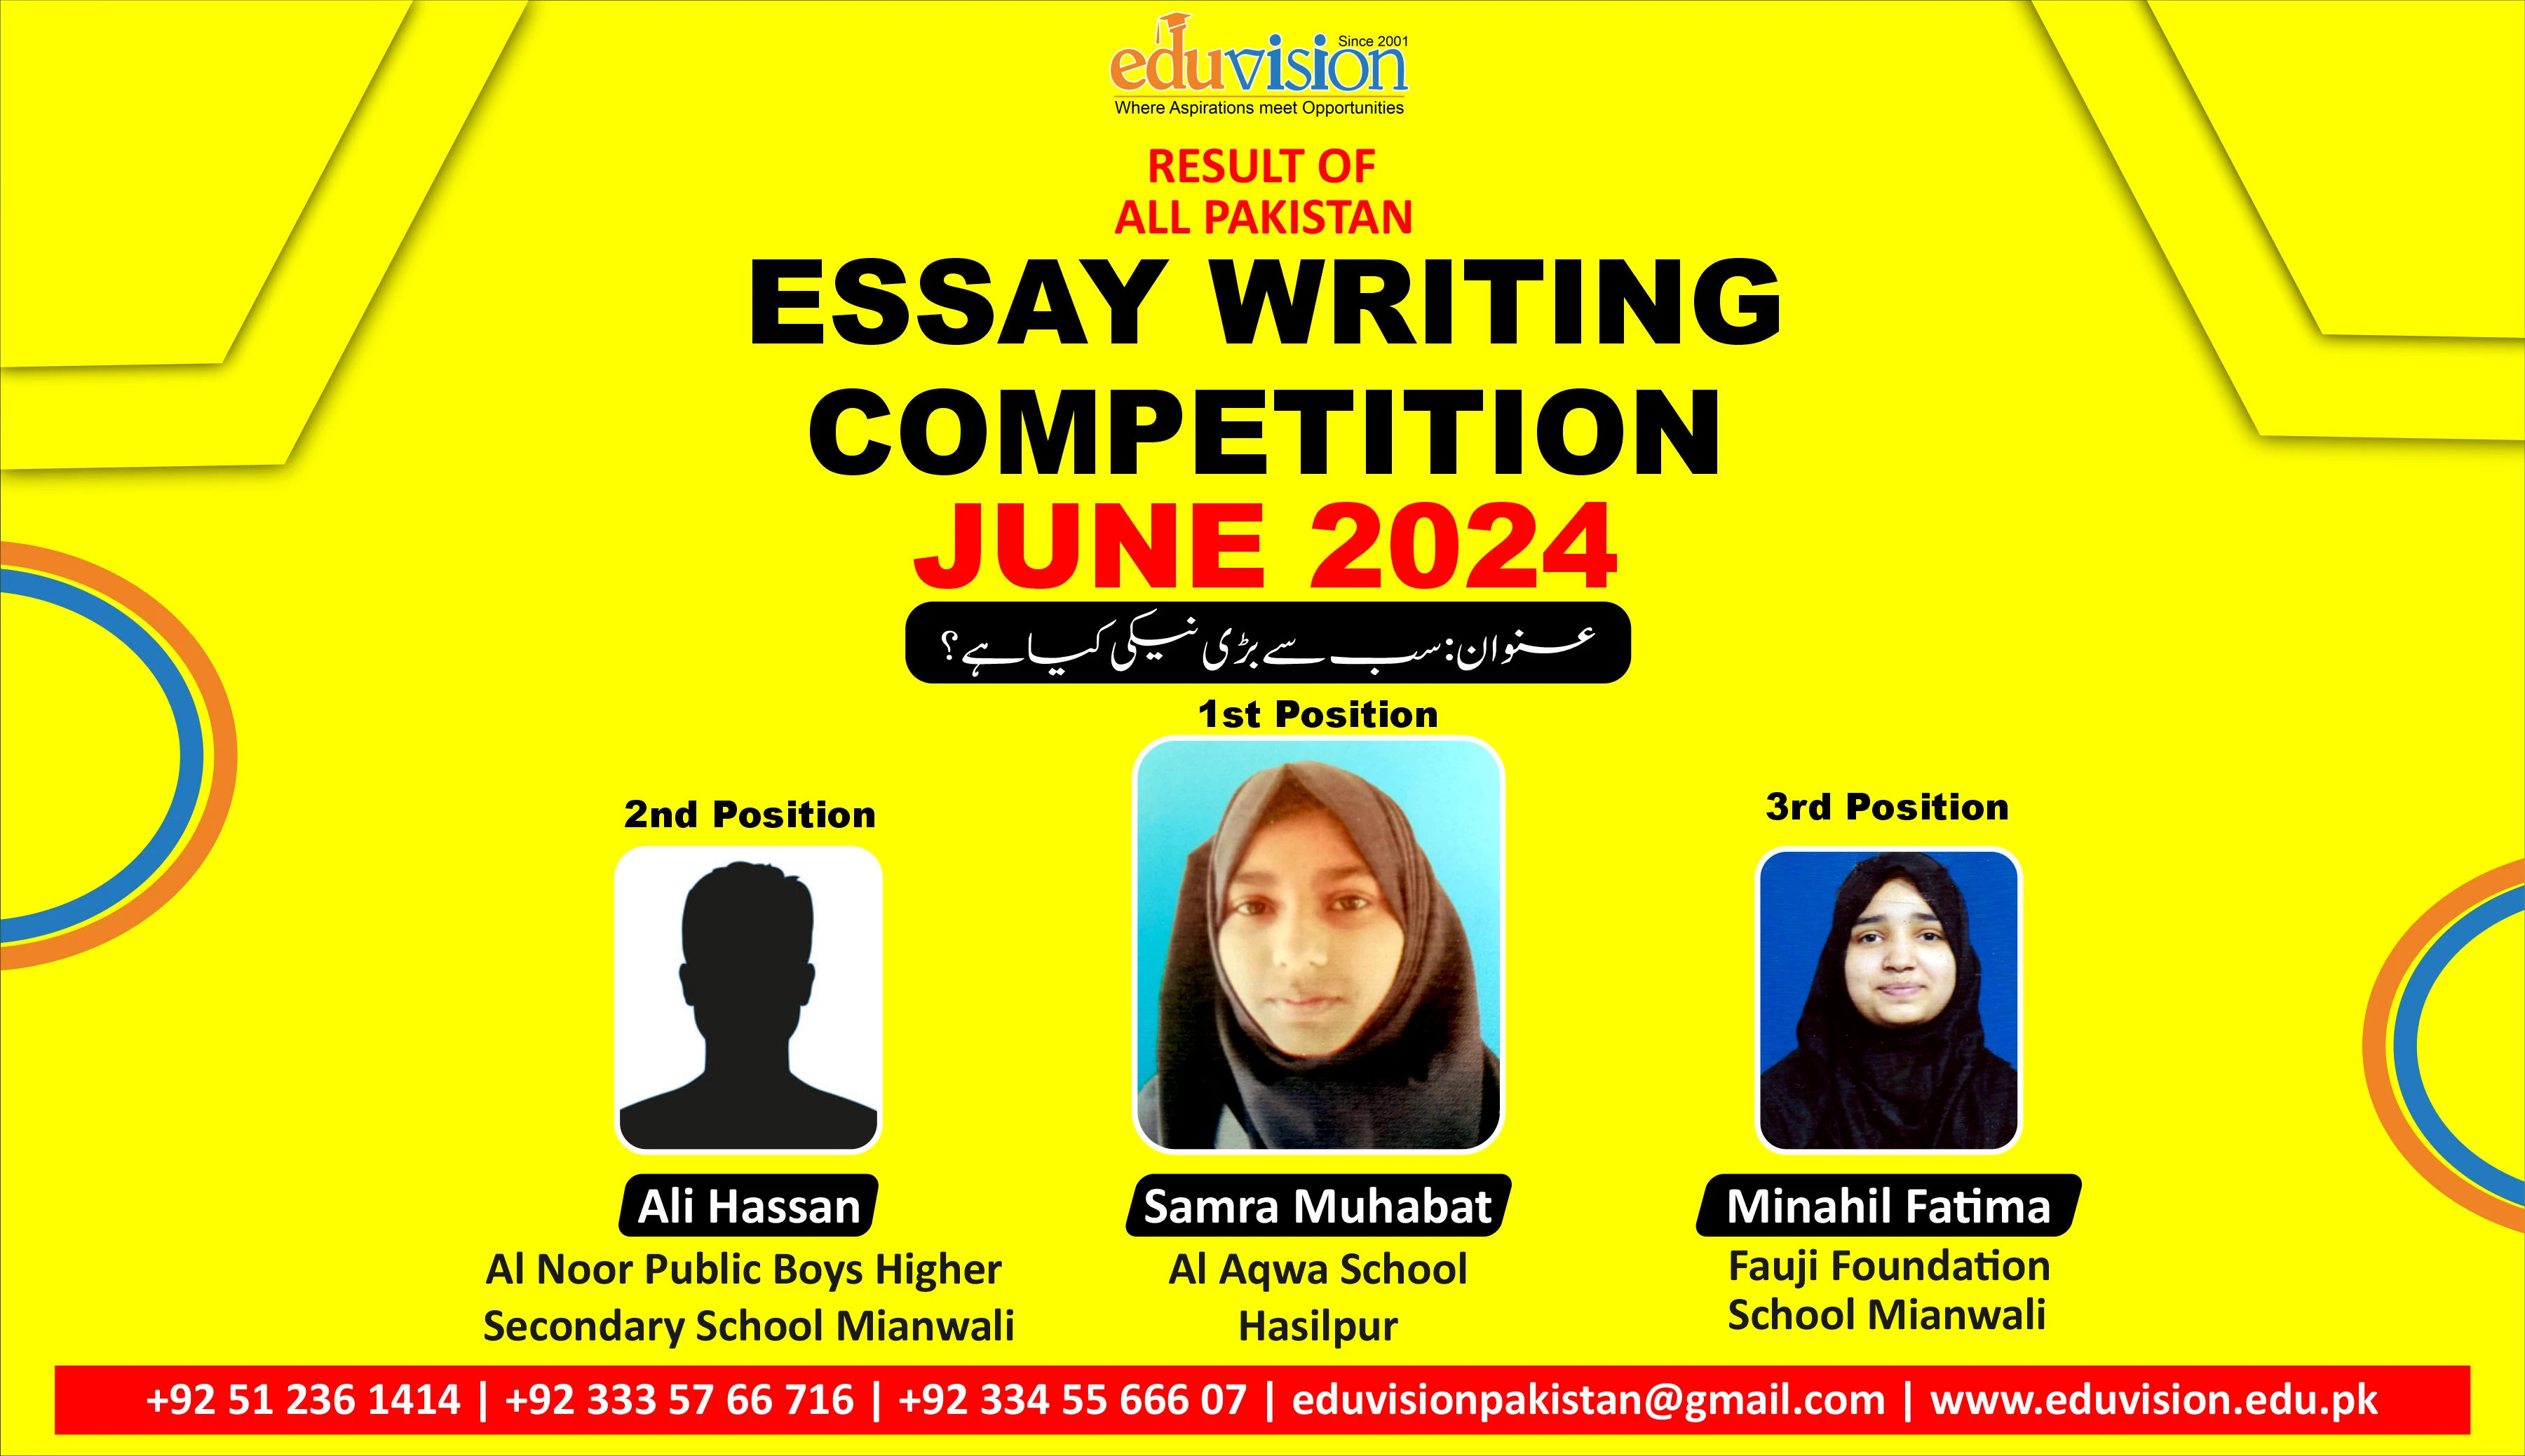 Top 3 Positions in Essay Writing Competition June 2024